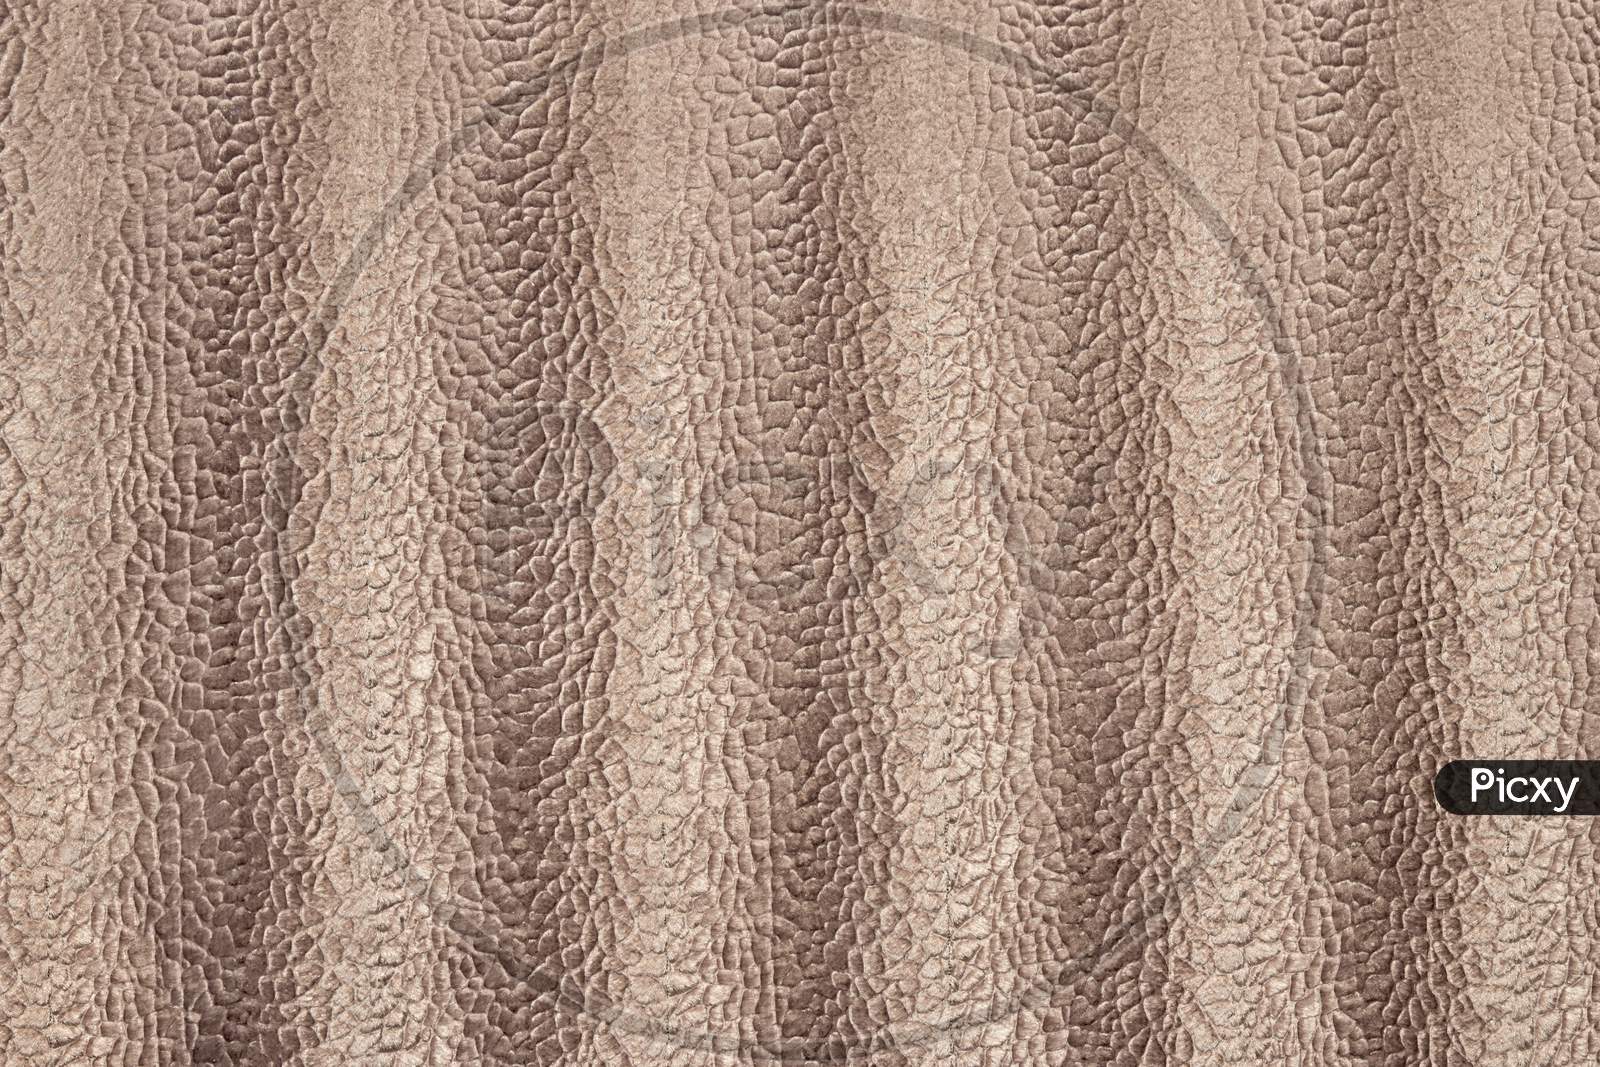 Highly Detailed Texture Of Beige Velvet Cloth With Snakeskin Patterns.